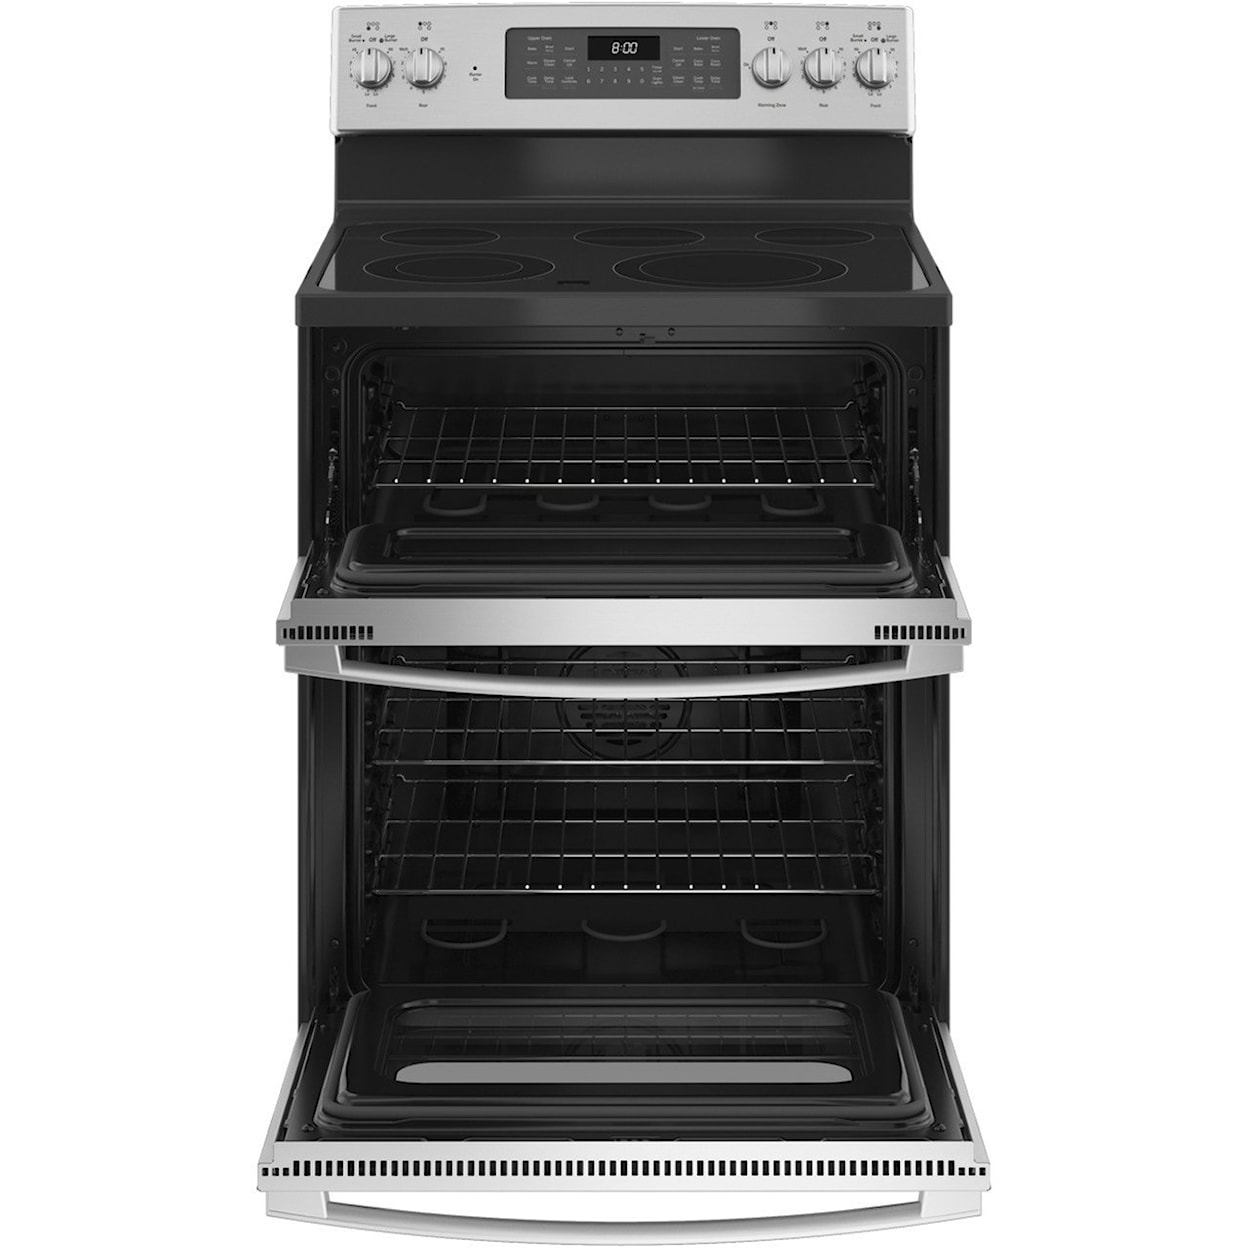 GE Appliances GE Electric Ranges 30" Free-Standing Electric Double Oven Range